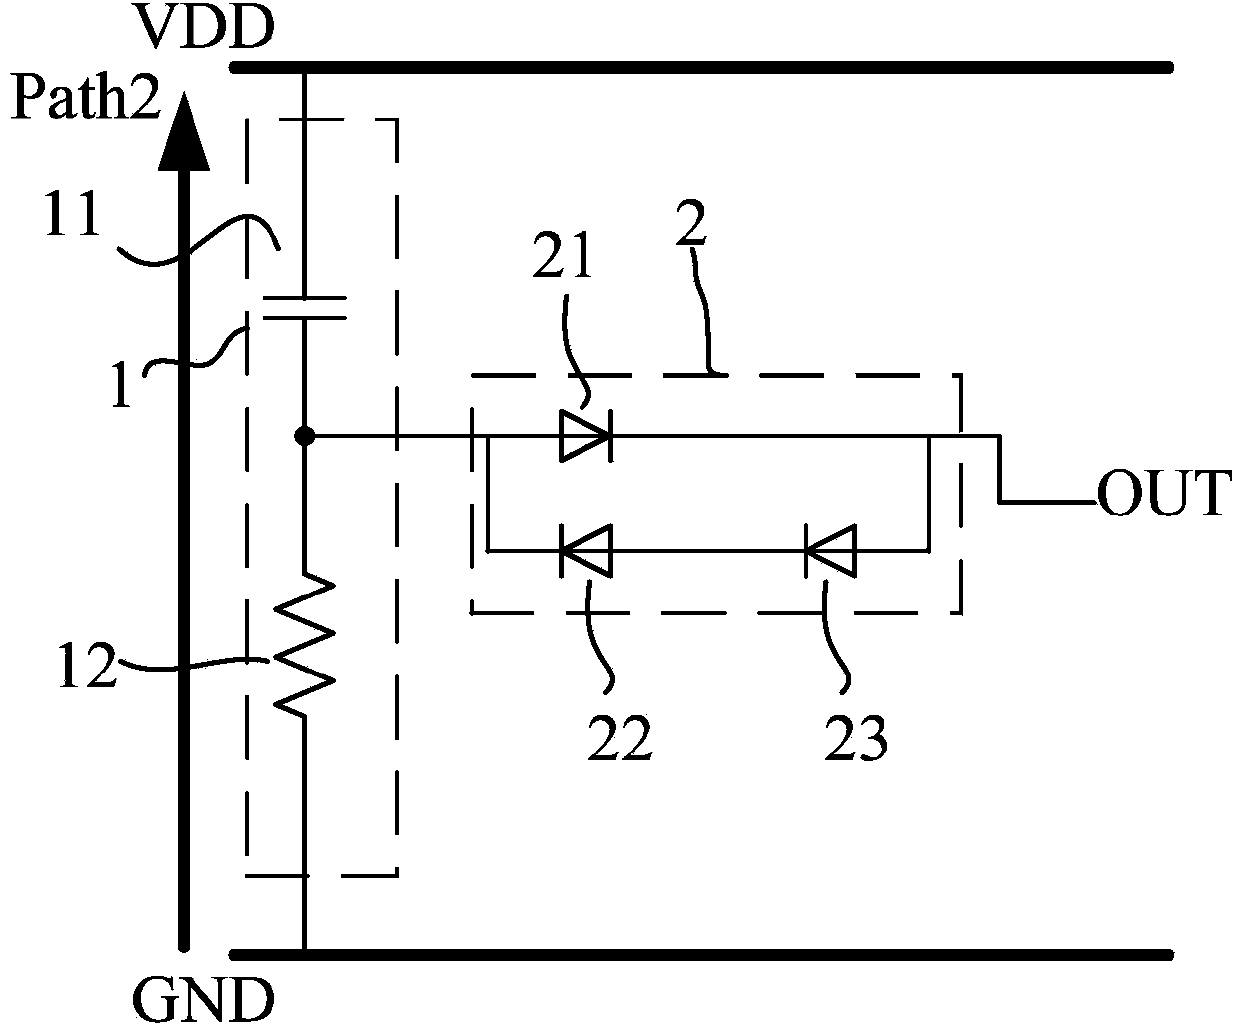 Anti-latch-up trigger circuit for ESD (Electronic Static Discharge)